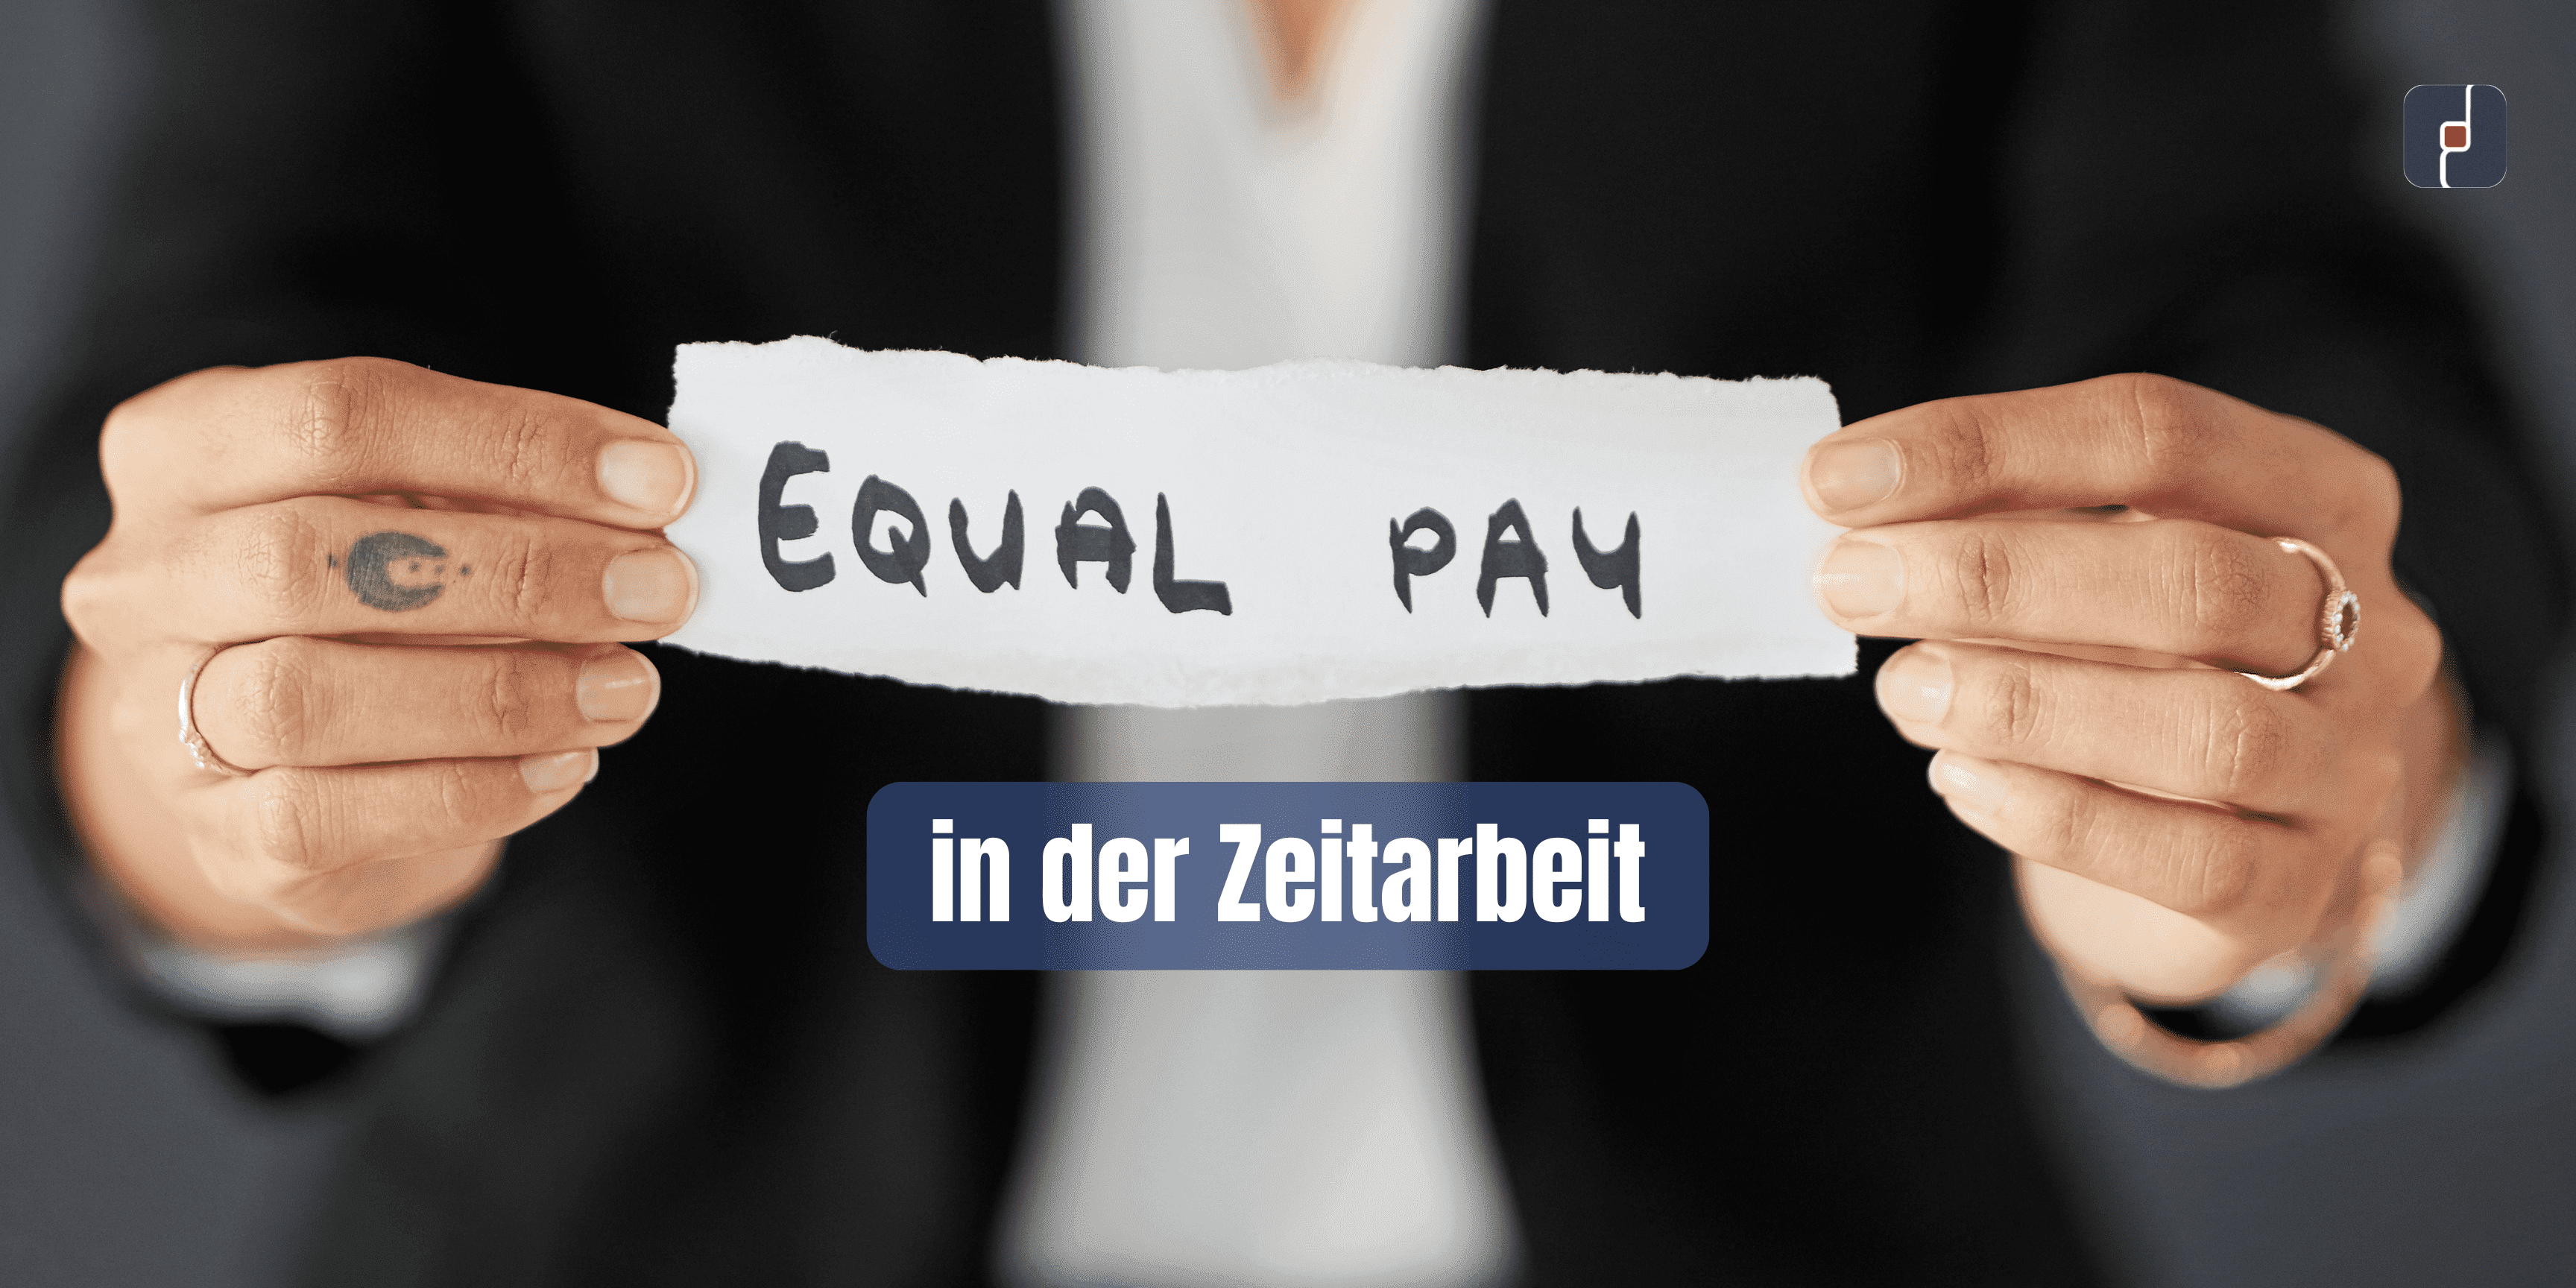 You are currently viewing Equal Pay in der Zeitarbeit